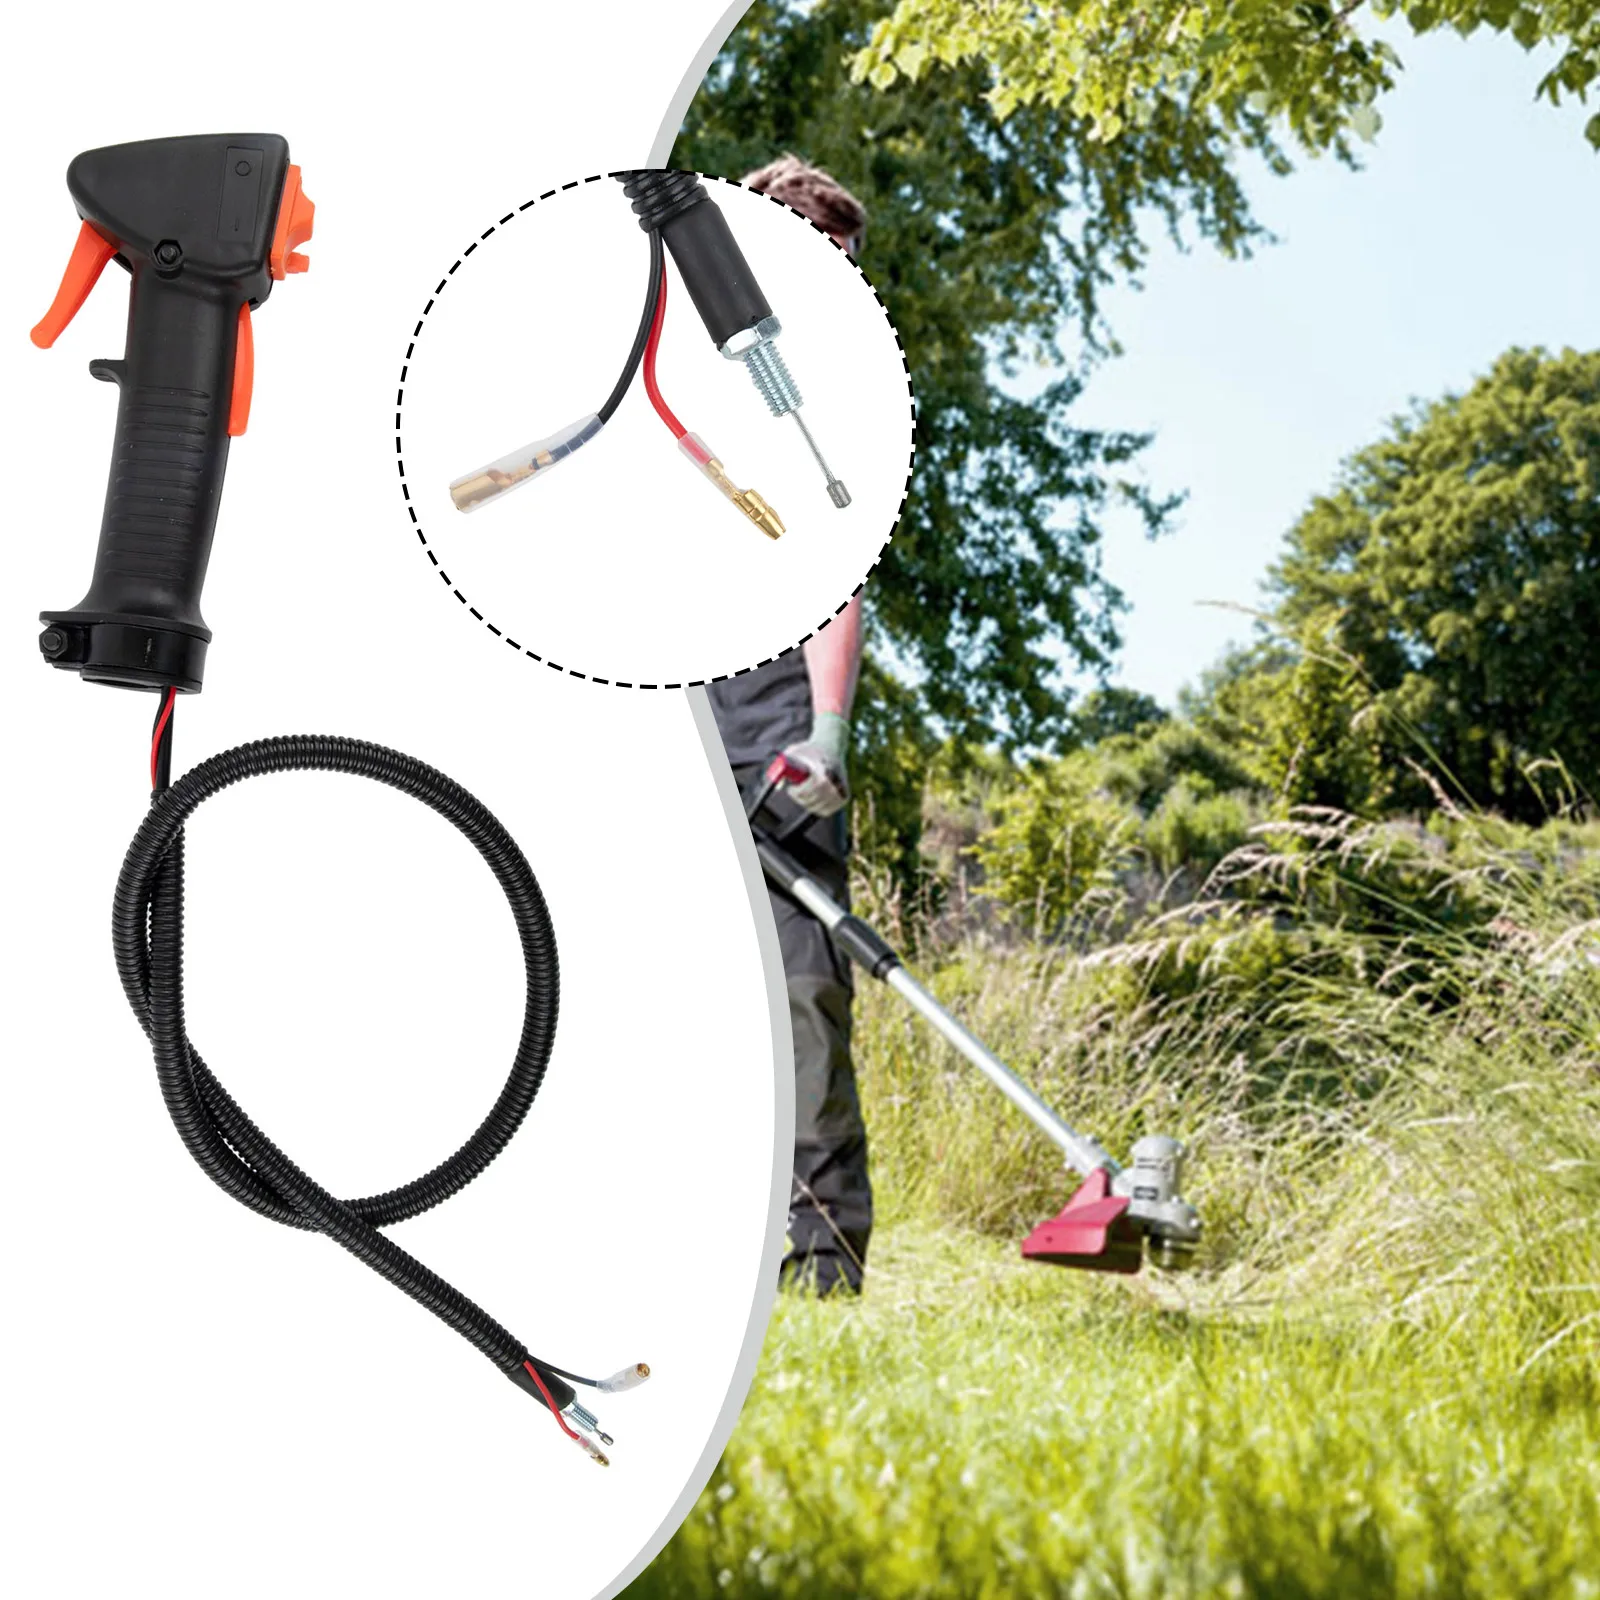 

1pcs Throttle Grip Suitable For MS-2TL-52 Brushcutter Trimmer Throttle Handle Garden String Trimmer Accessories